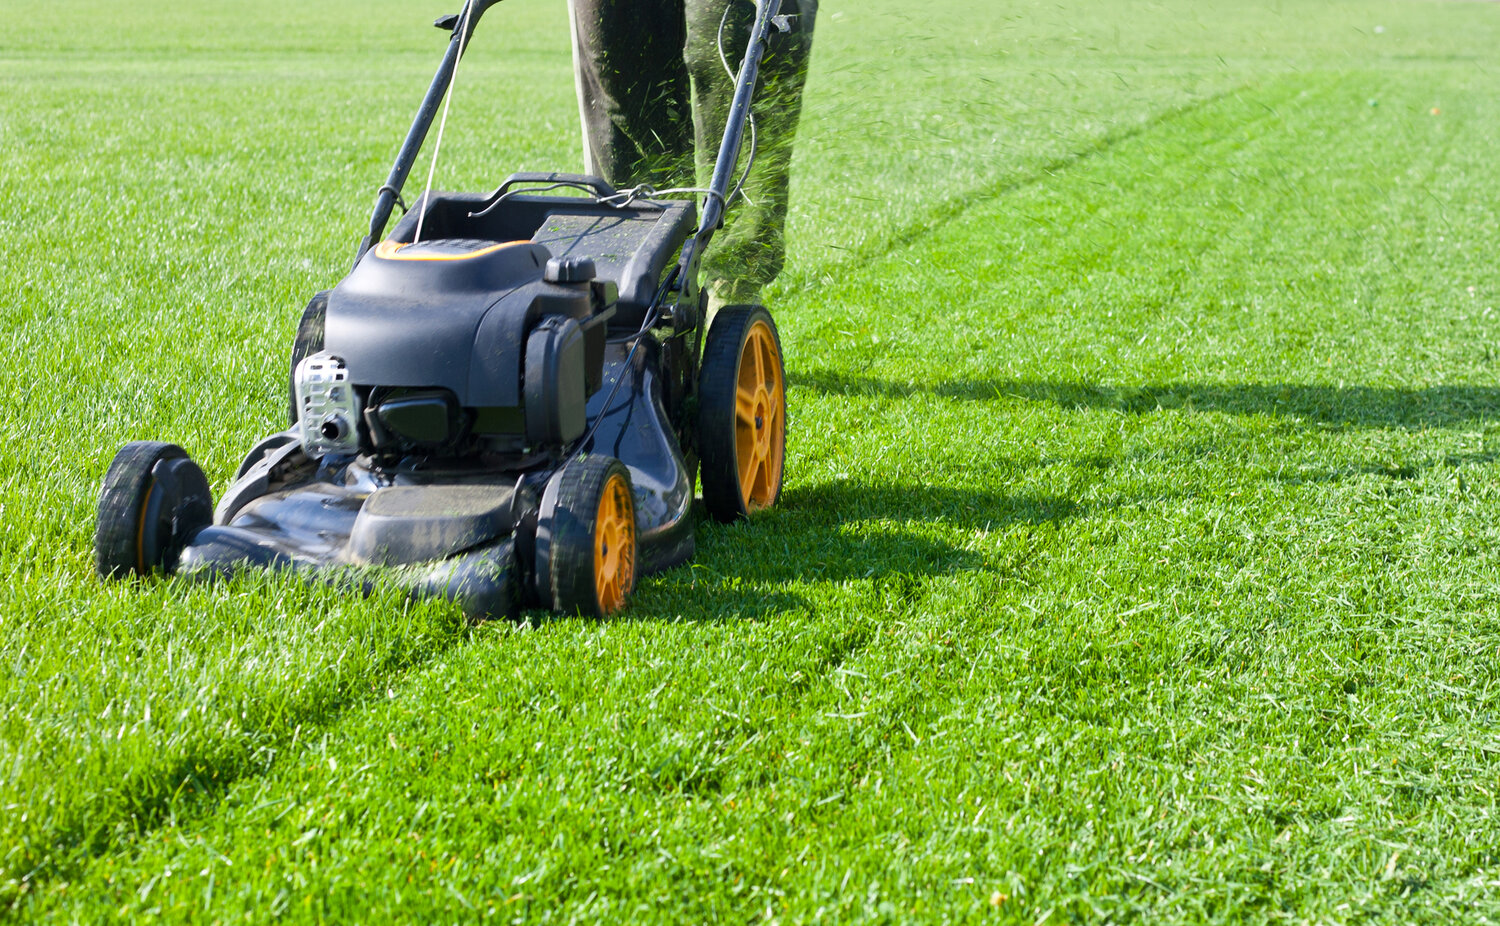 Lawn mower being used to trim a large area of grass